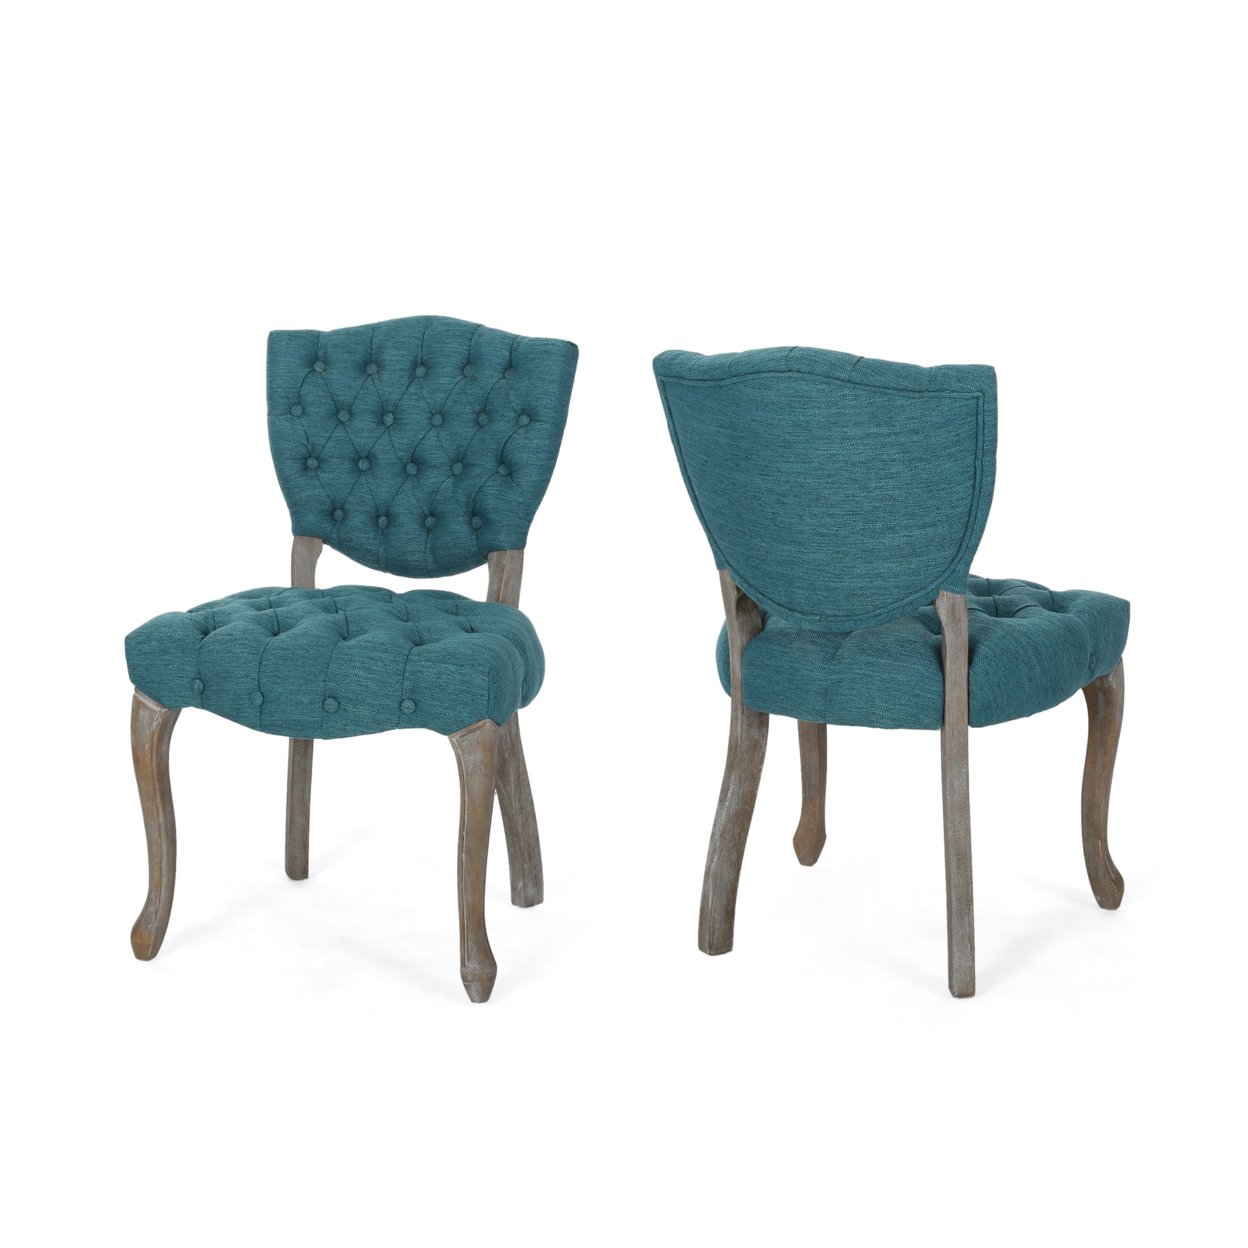 Case Tufted Dining Chair With Cabriole Legs (Set Of 2) - Teal + Brown Wash Finish